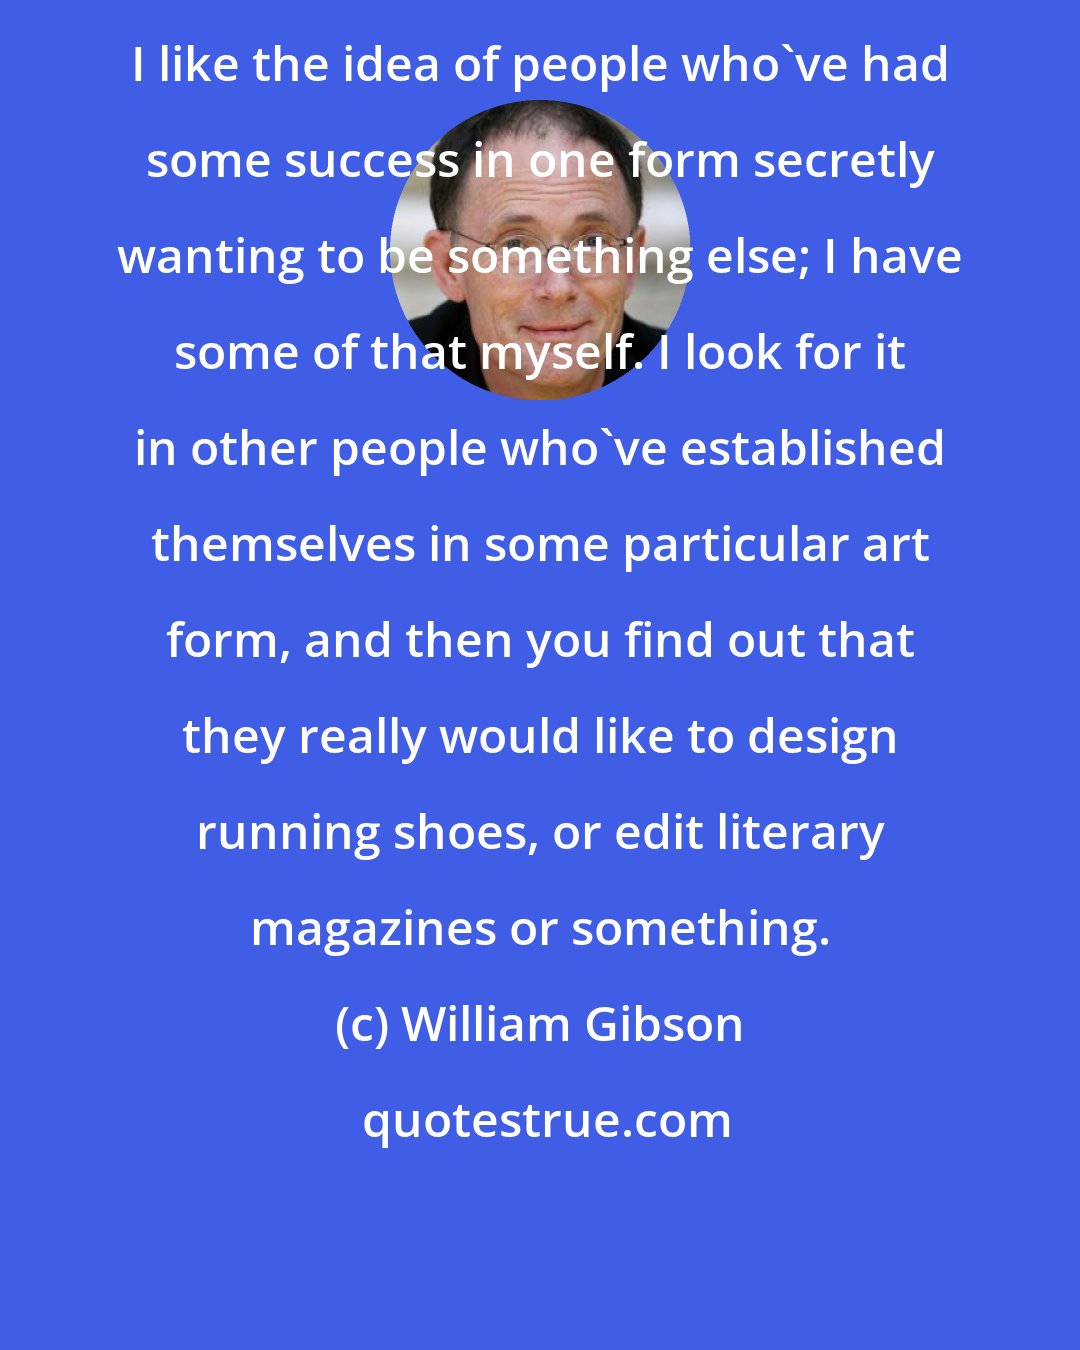 William Gibson: I like the idea of people who've had some success in one form secretly wanting to be something else; I have some of that myself. I look for it in other people who've established themselves in some particular art form, and then you find out that they really would like to design running shoes, or edit literary magazines or something.